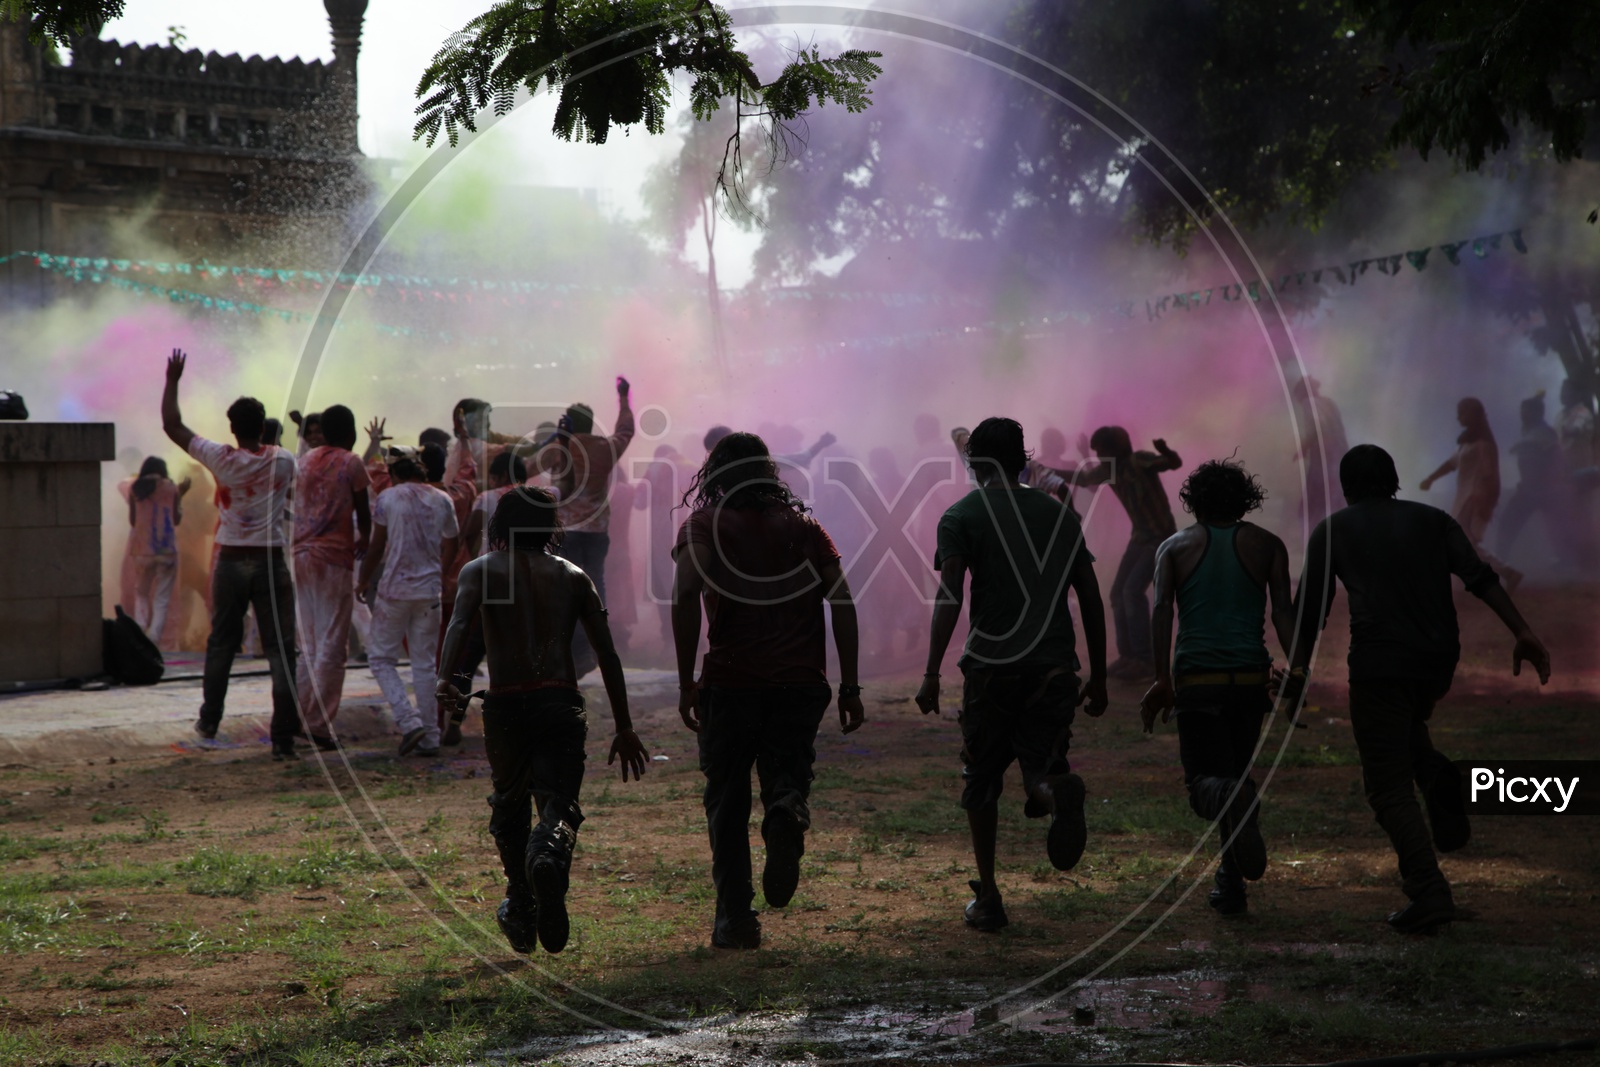 People celebrating holi / People throwing colors to each other during the Holi celebration